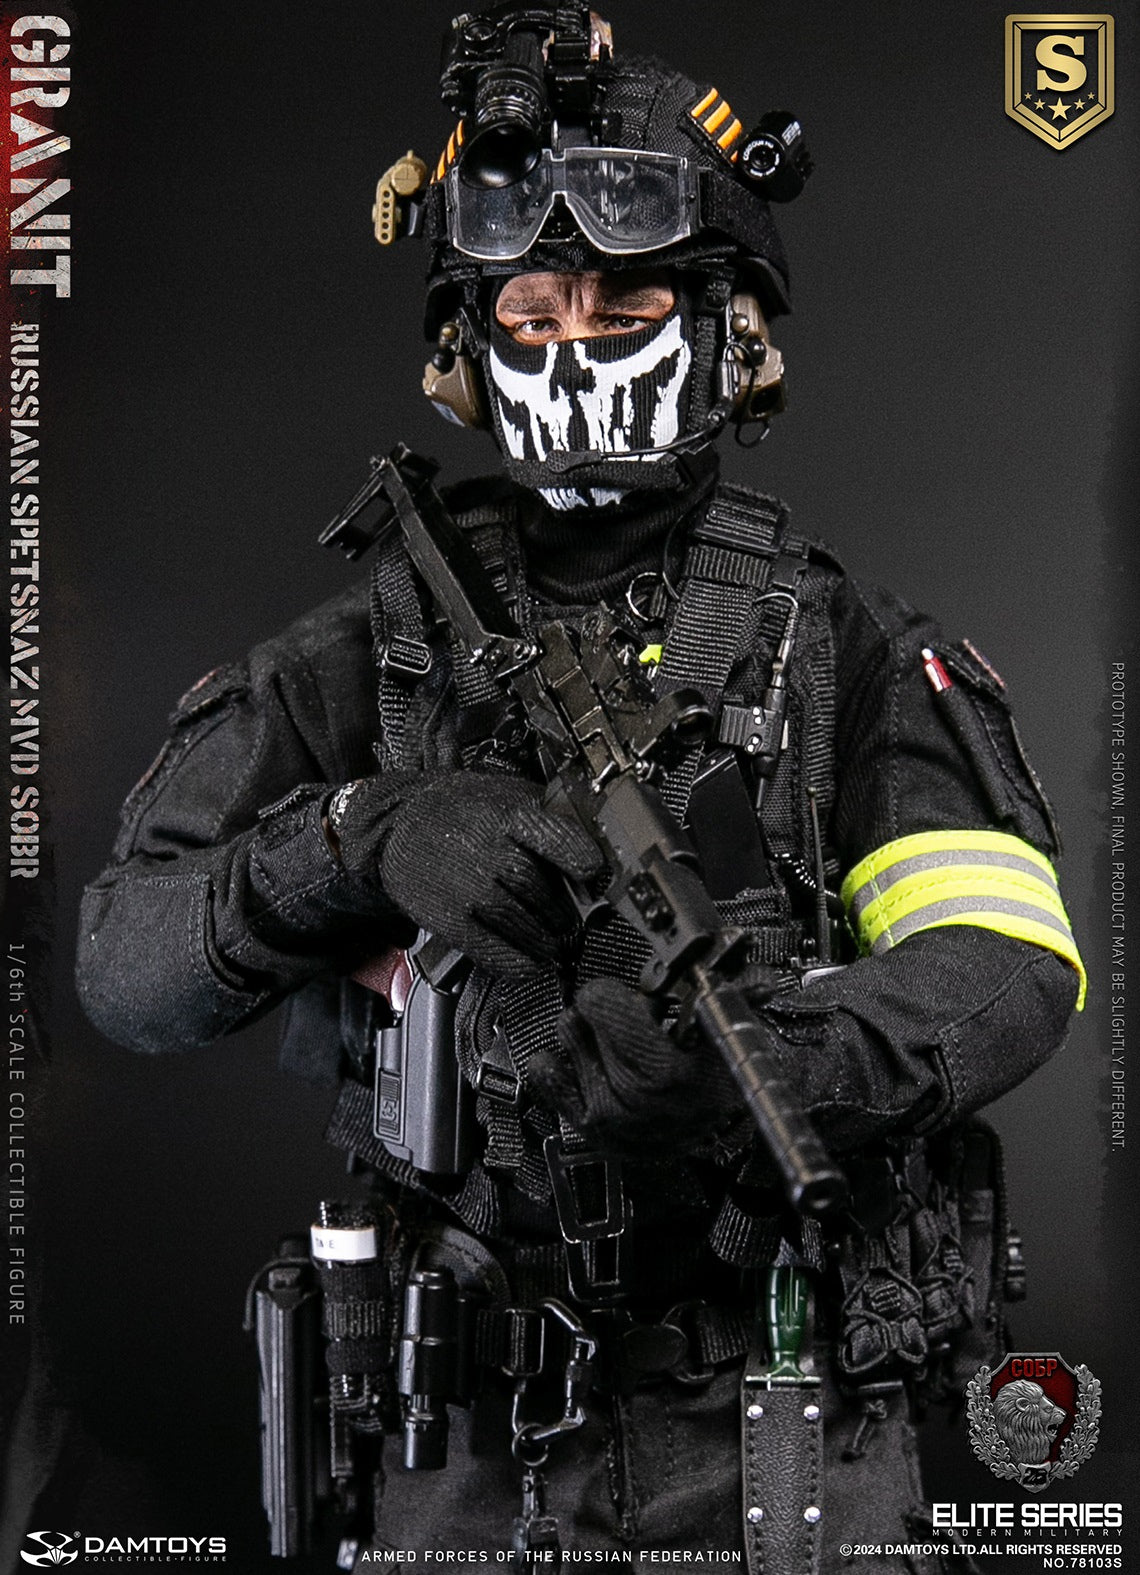 Damtoys - 78103S - Elite Series - Armed Forces of the Russian Federation: SPETSNAZ MVD SOBR Granit (Special ed.) (1/6 Scale) - Marvelous Toys